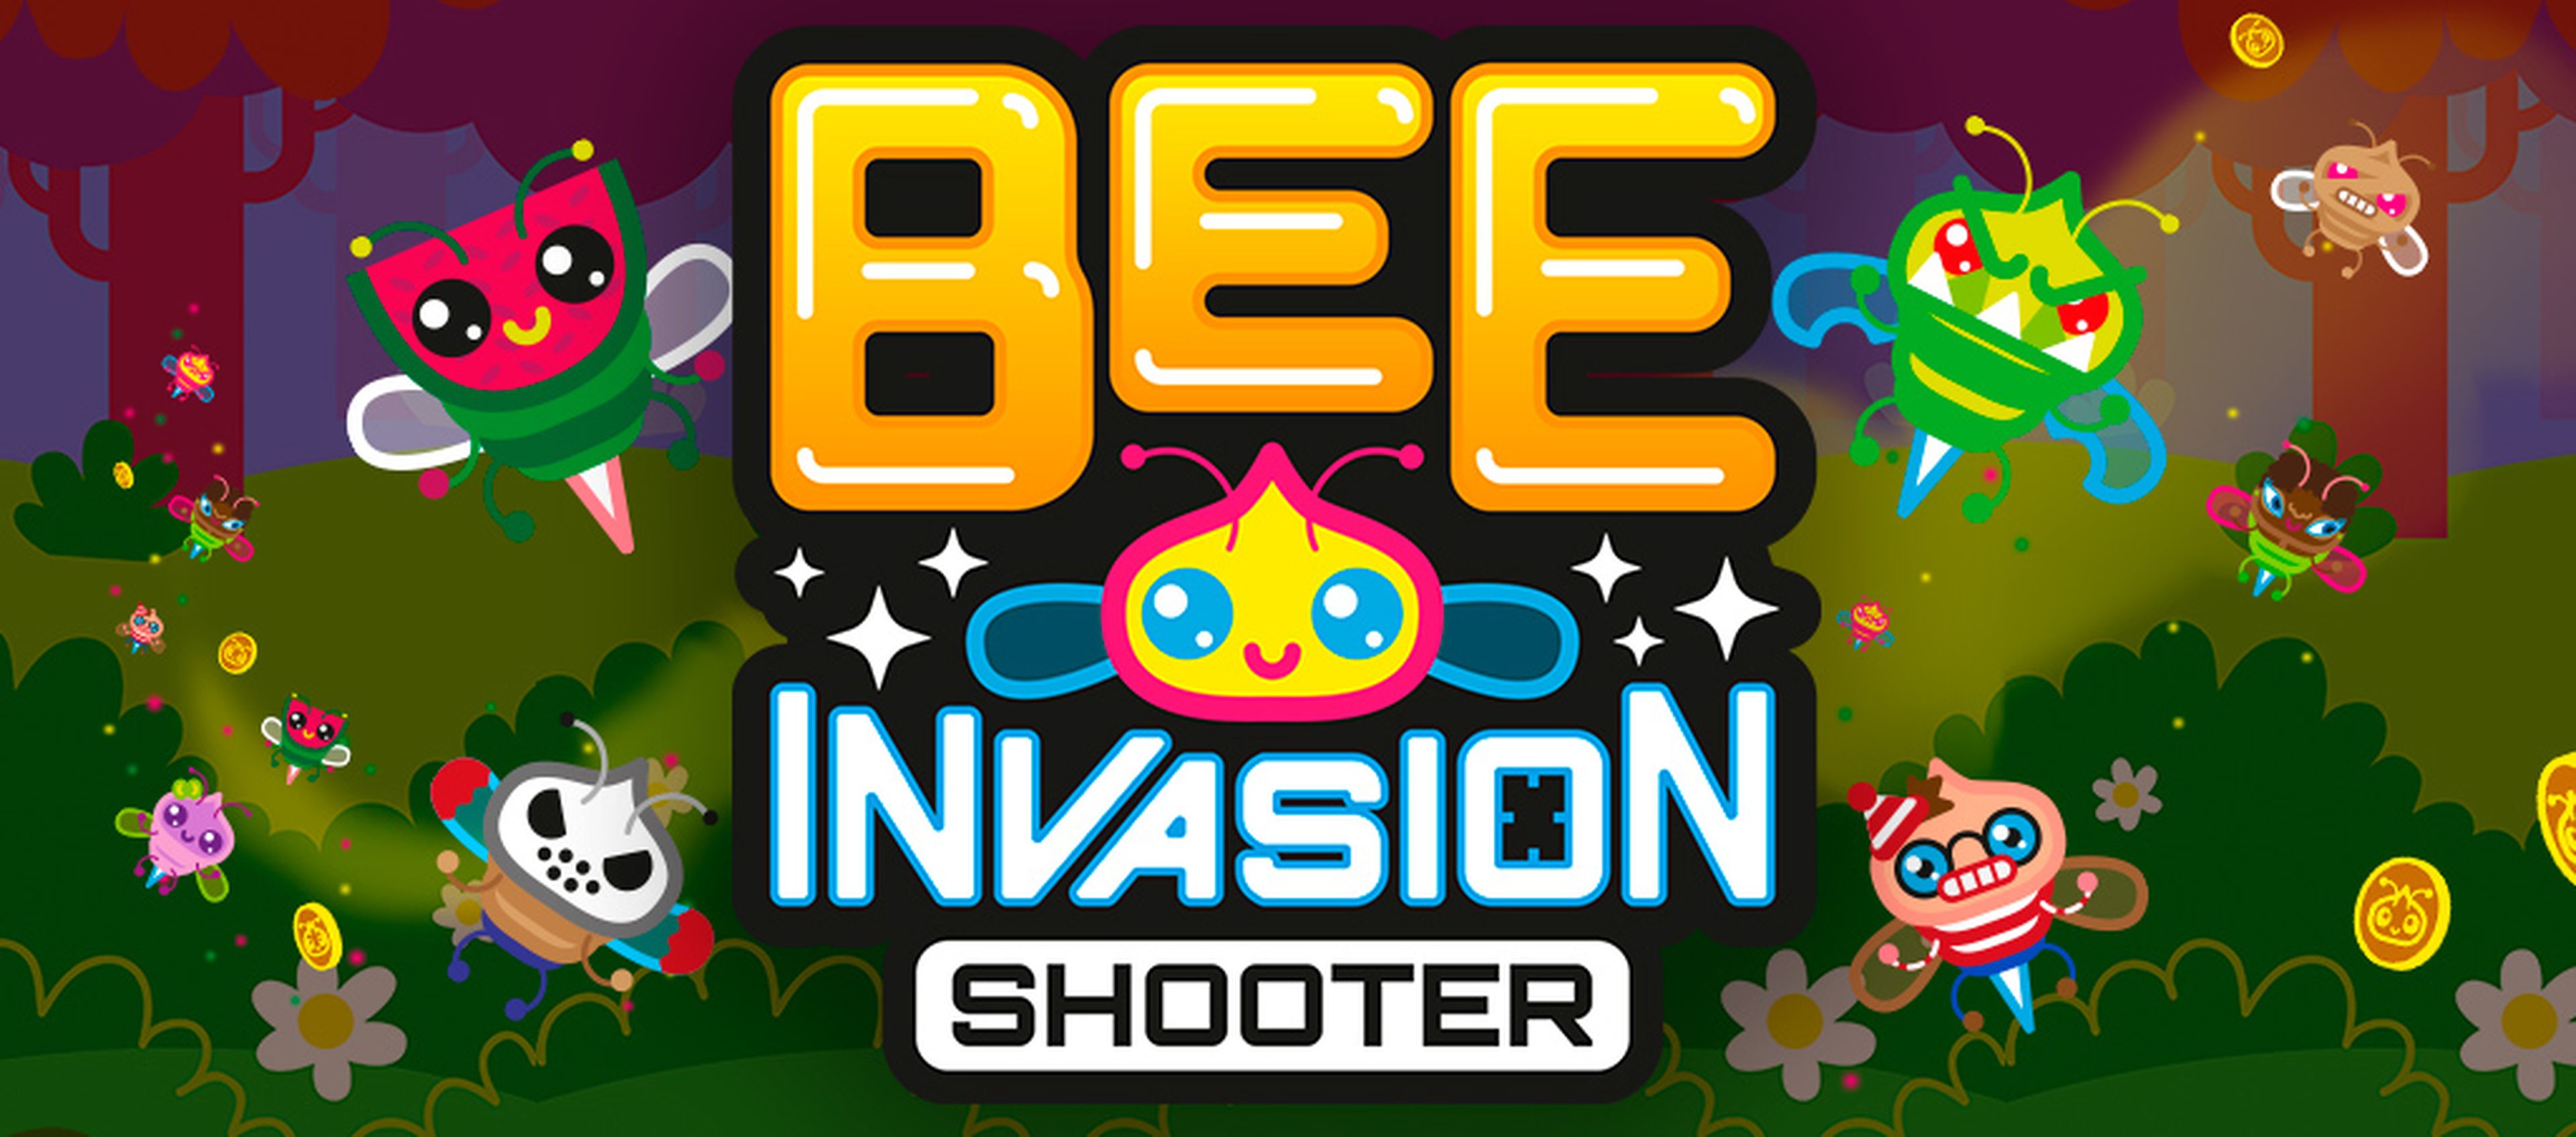 Bee Invasion Shooter